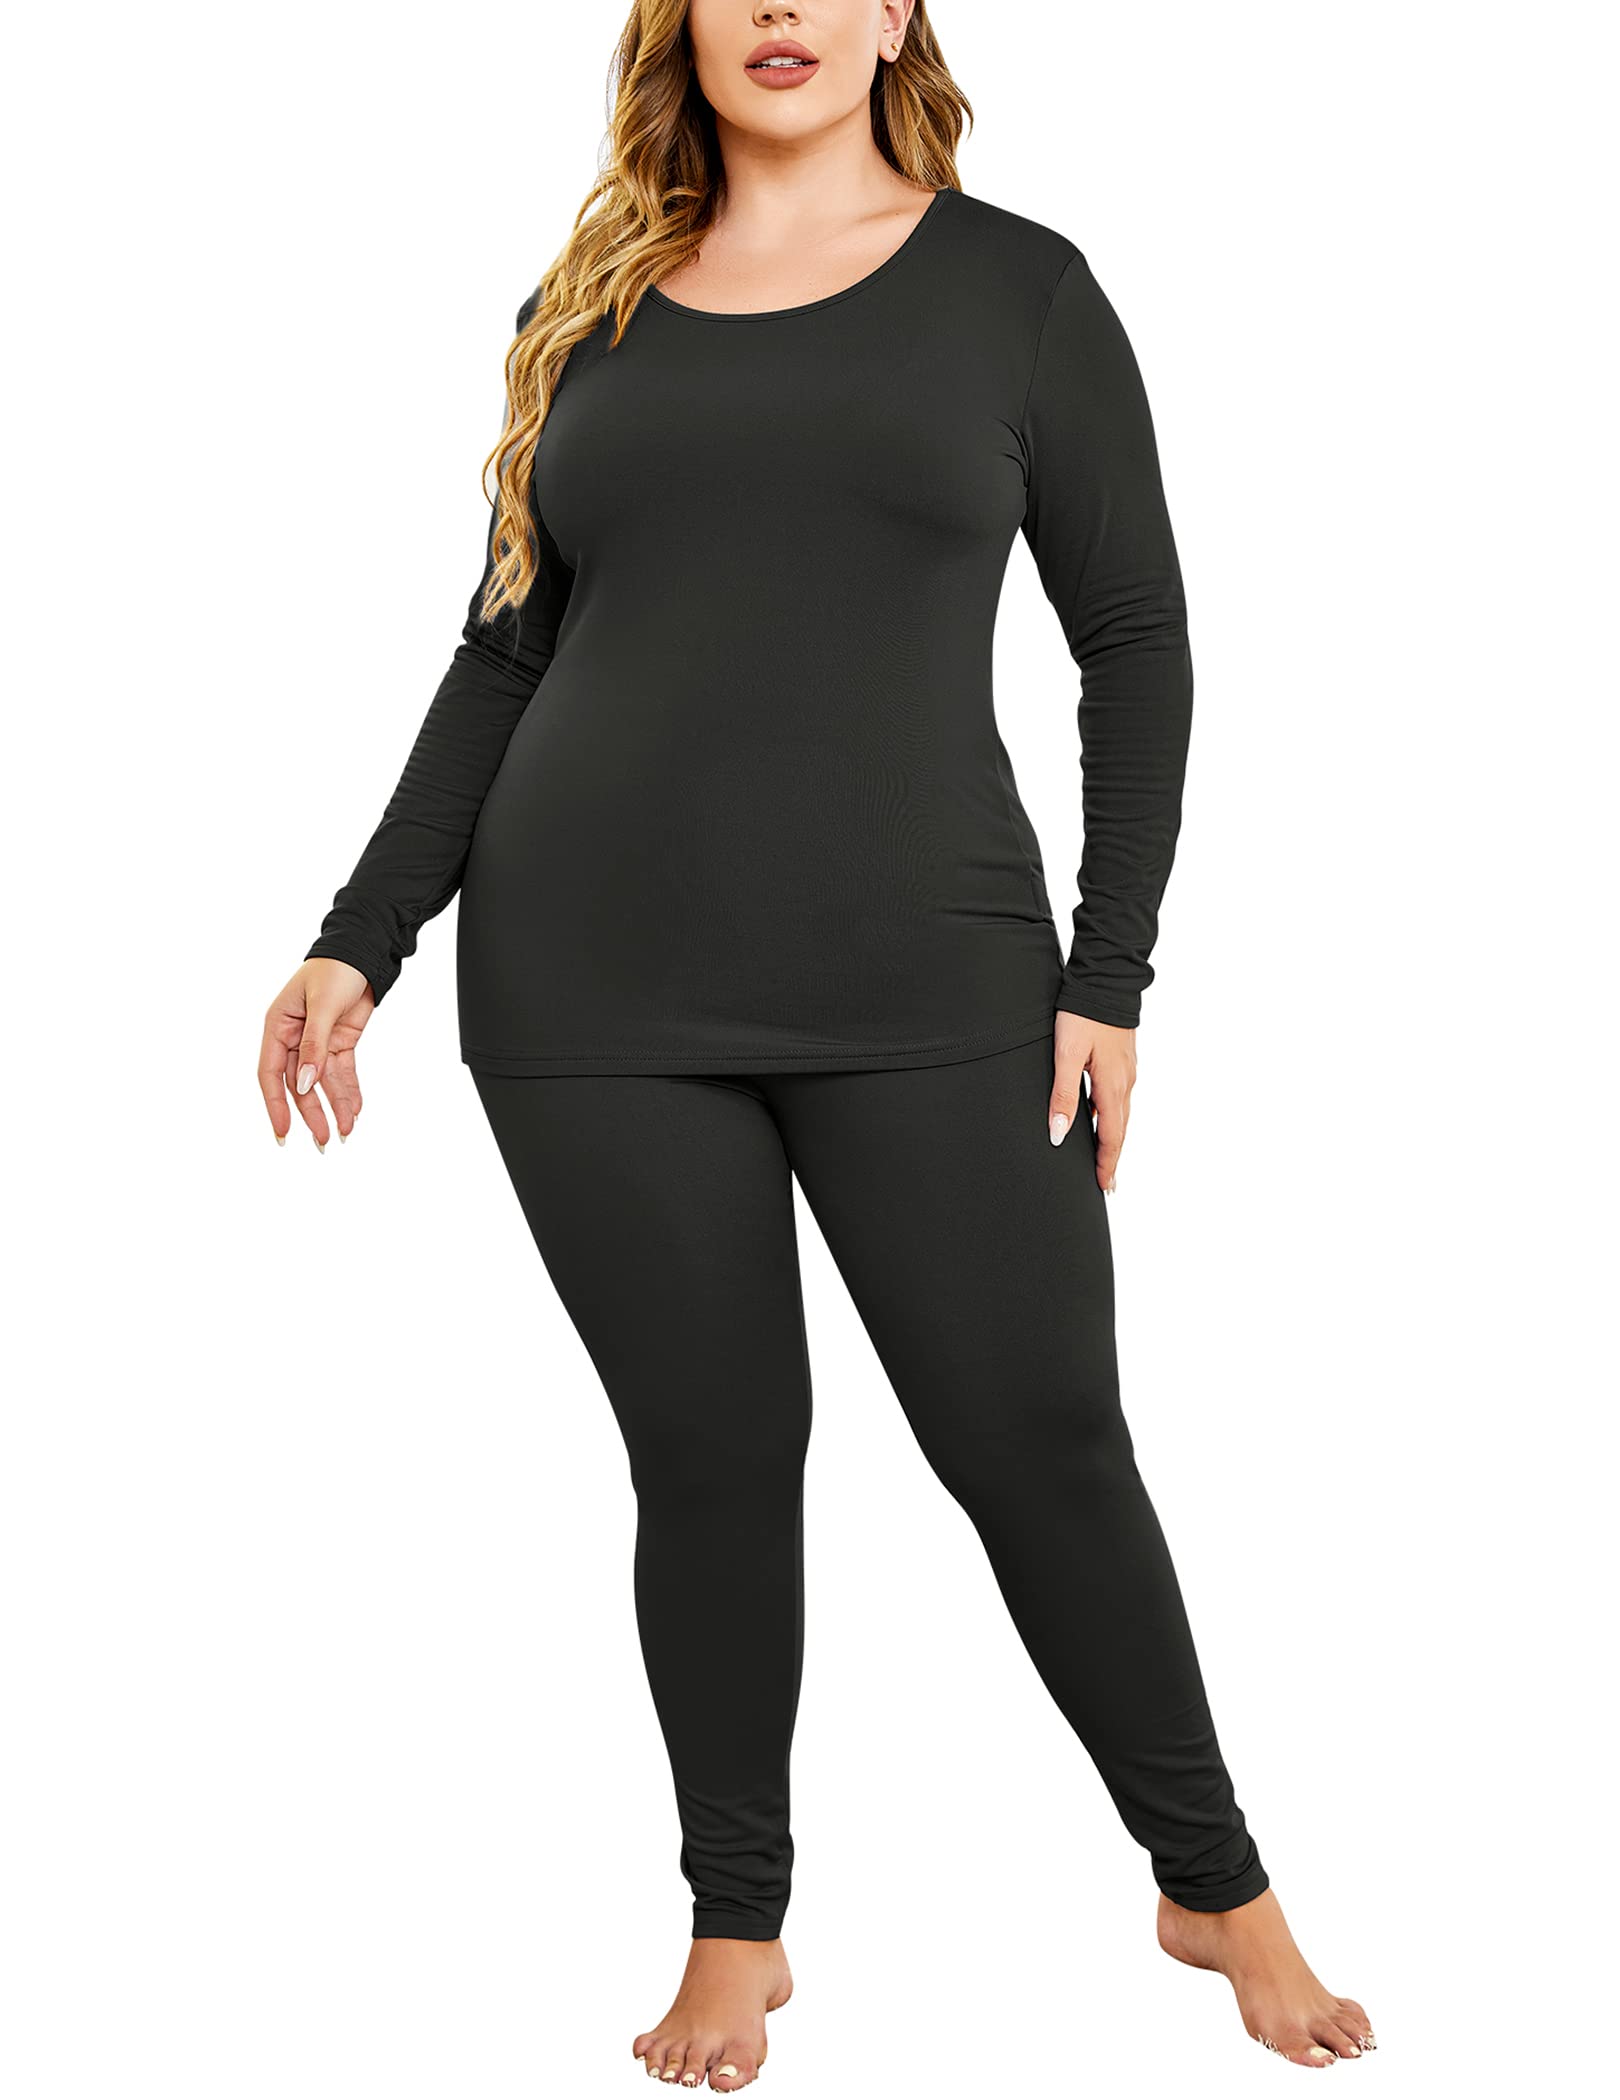 IN'VOLAND Womens Plus Size Thermal Long Johns Sets Fleece Lined 2